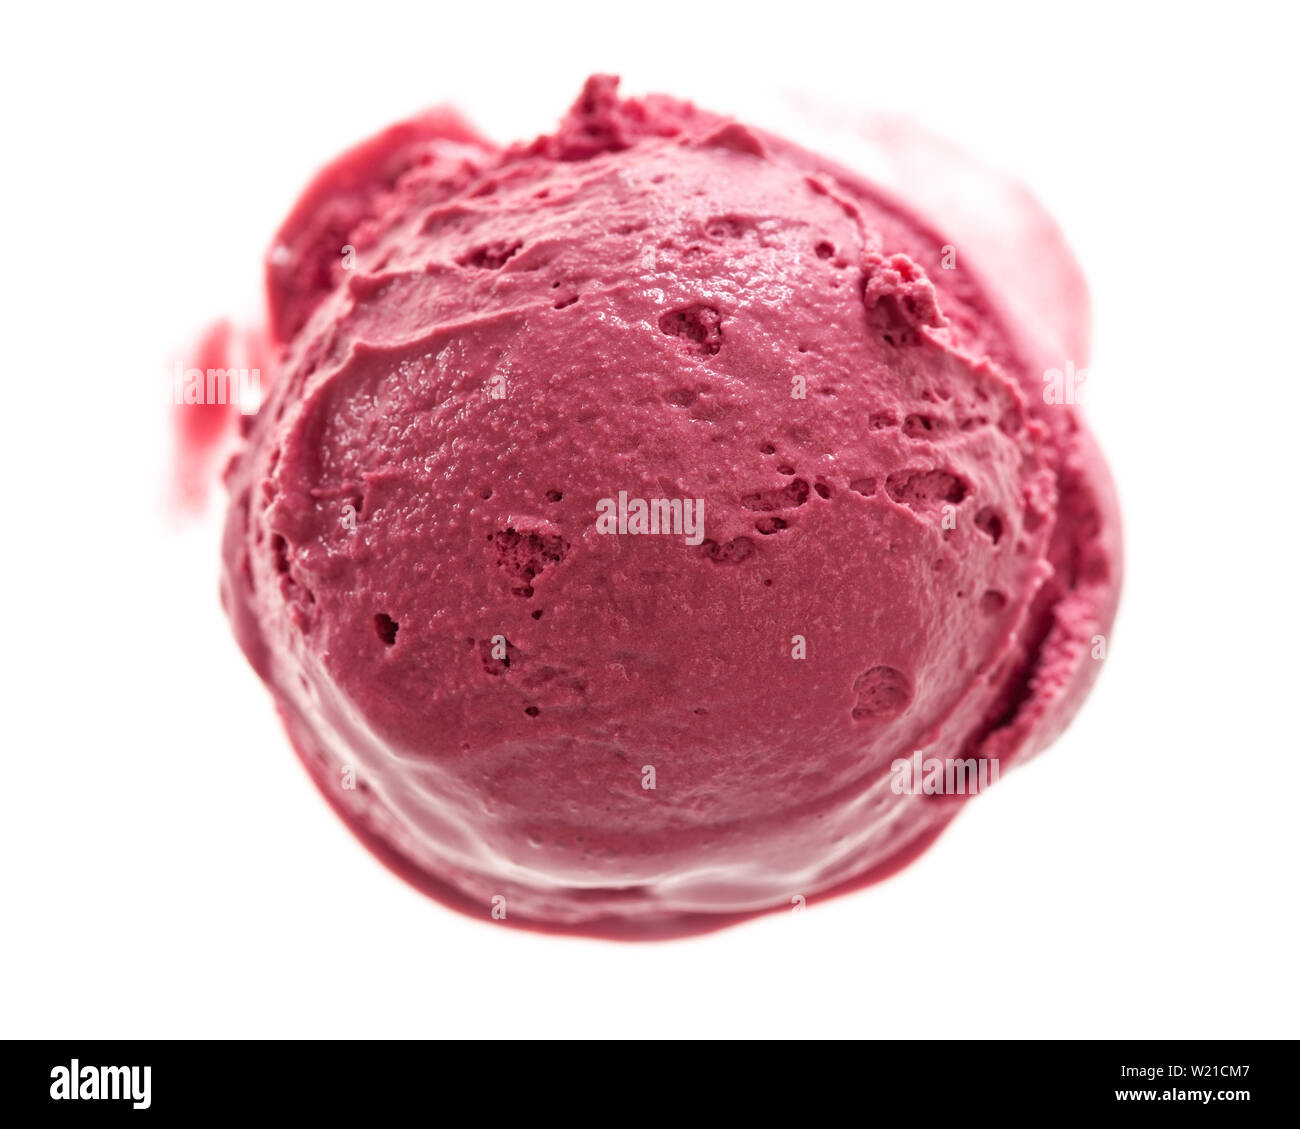 strawberry Ice Cream Scoop side view Isolated On White Background